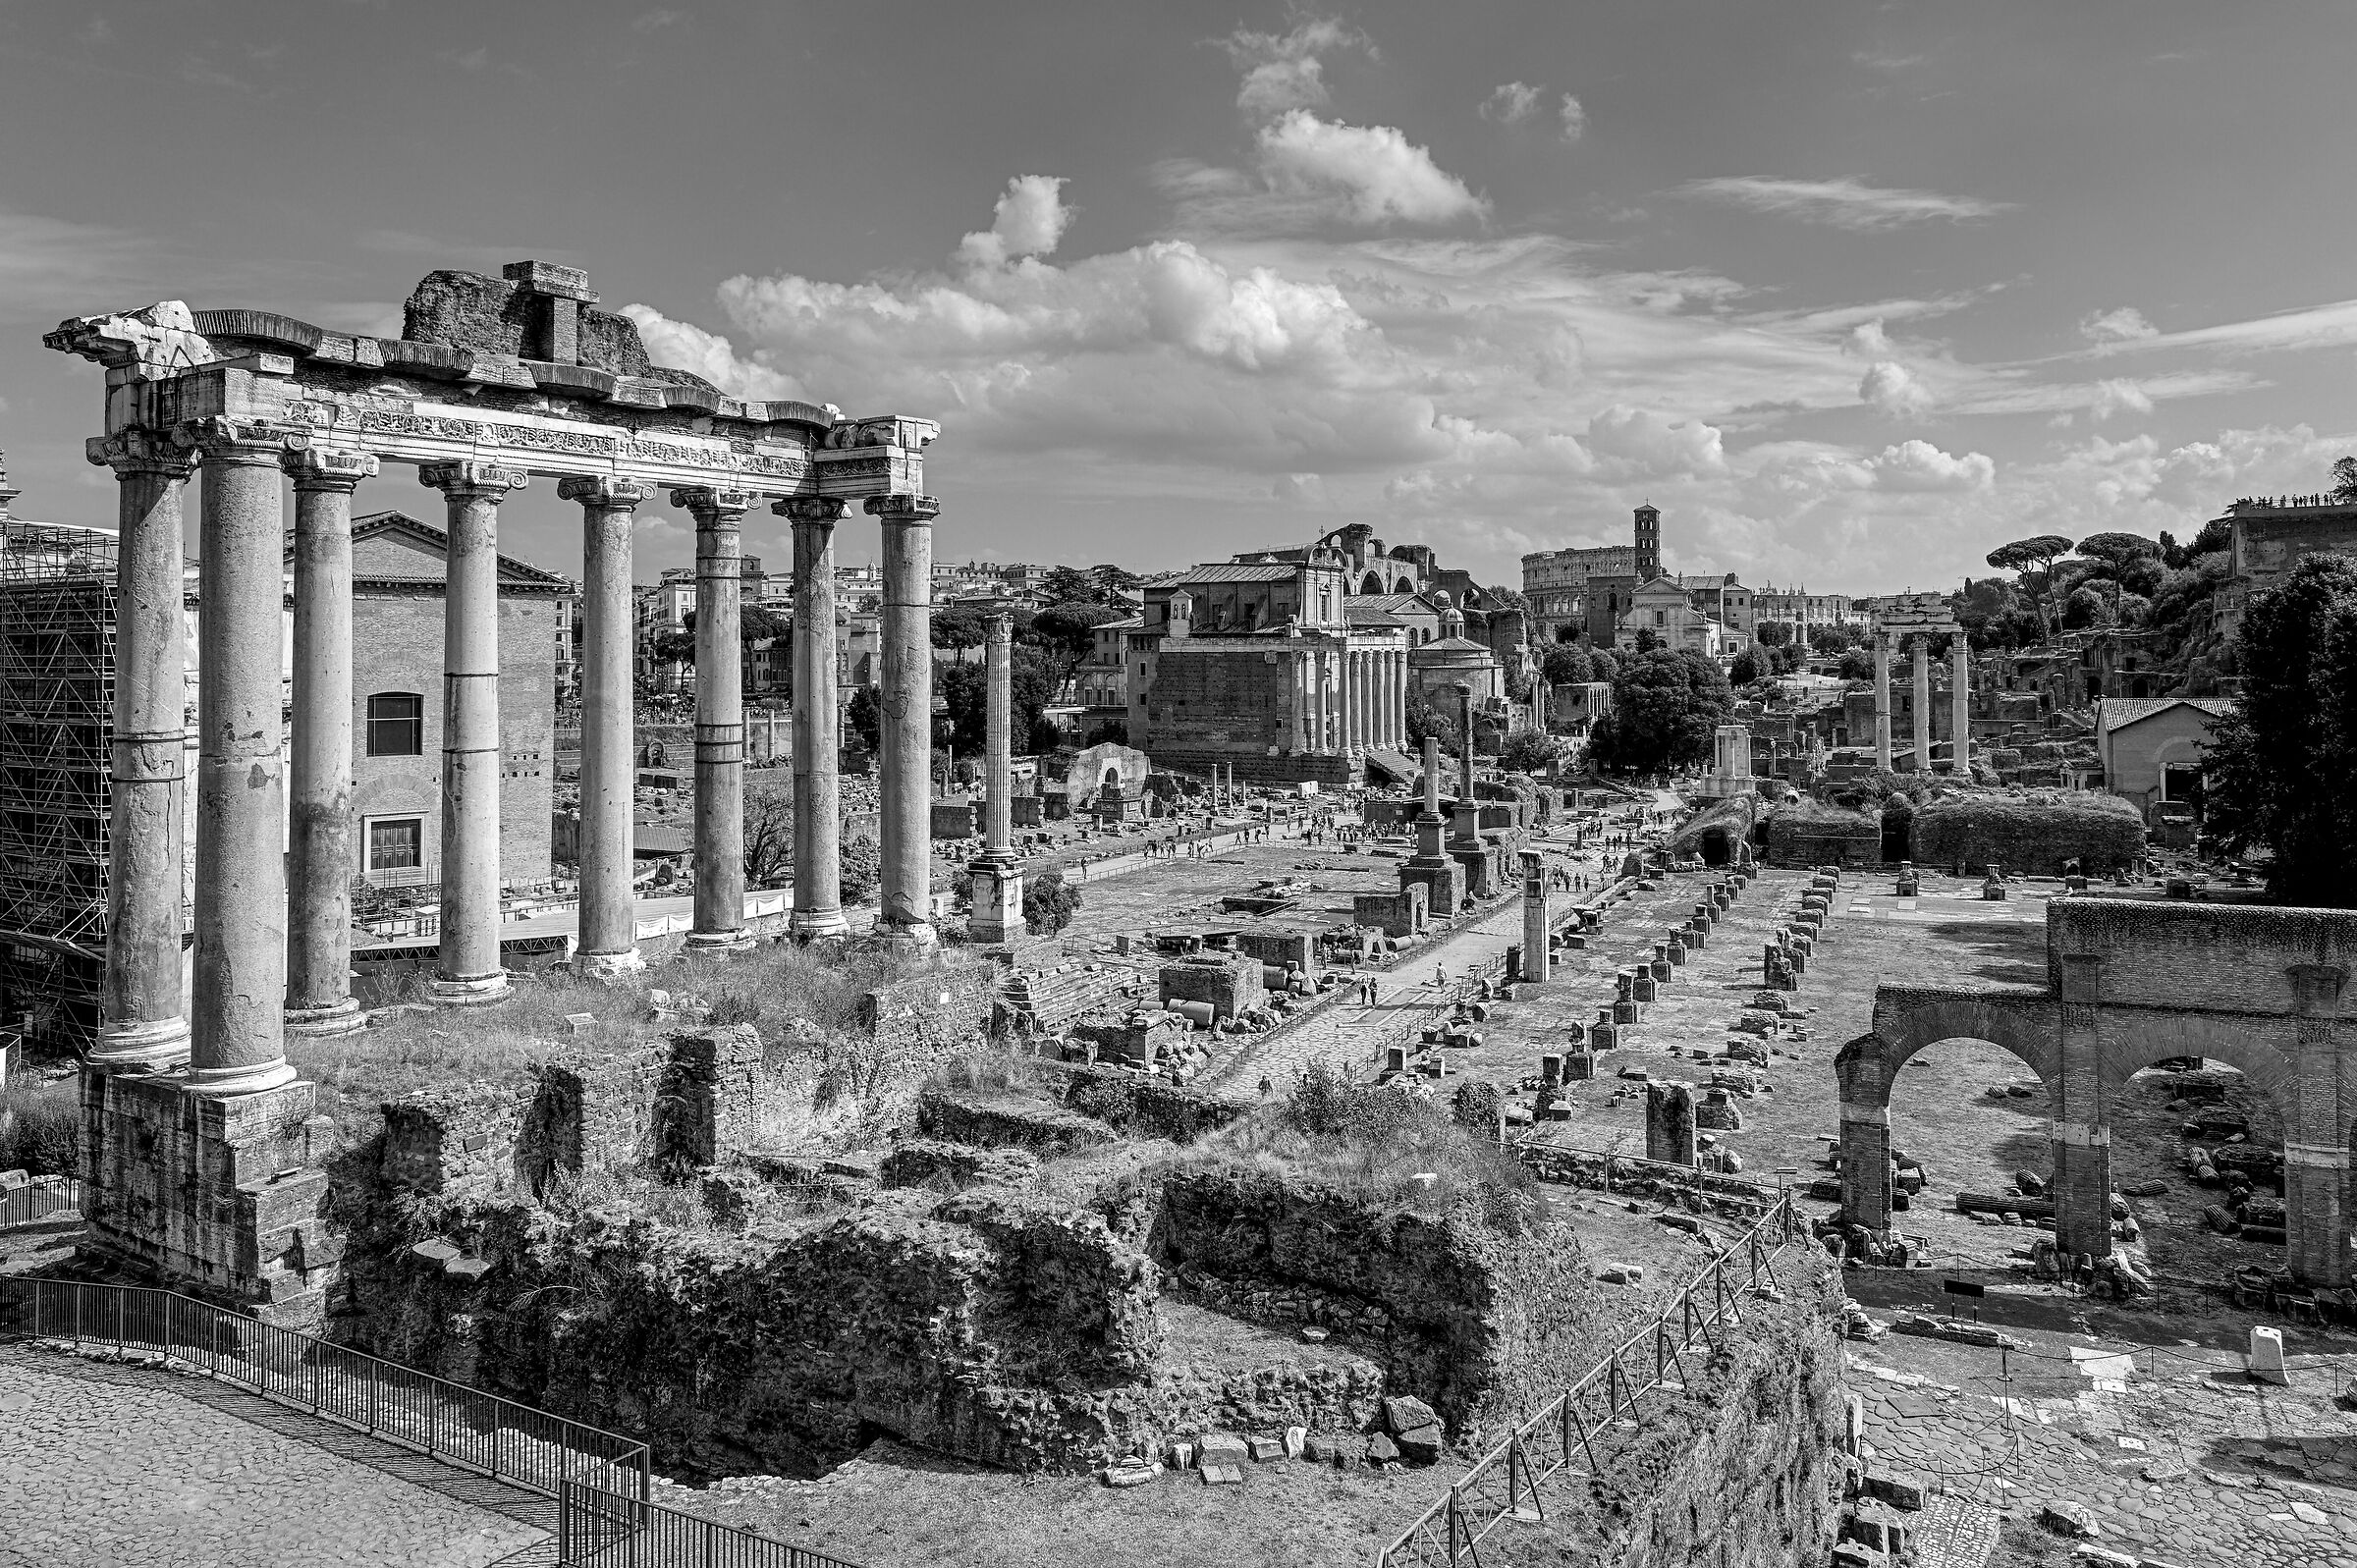 Imperial Rome ... my 2 cents in B&W...